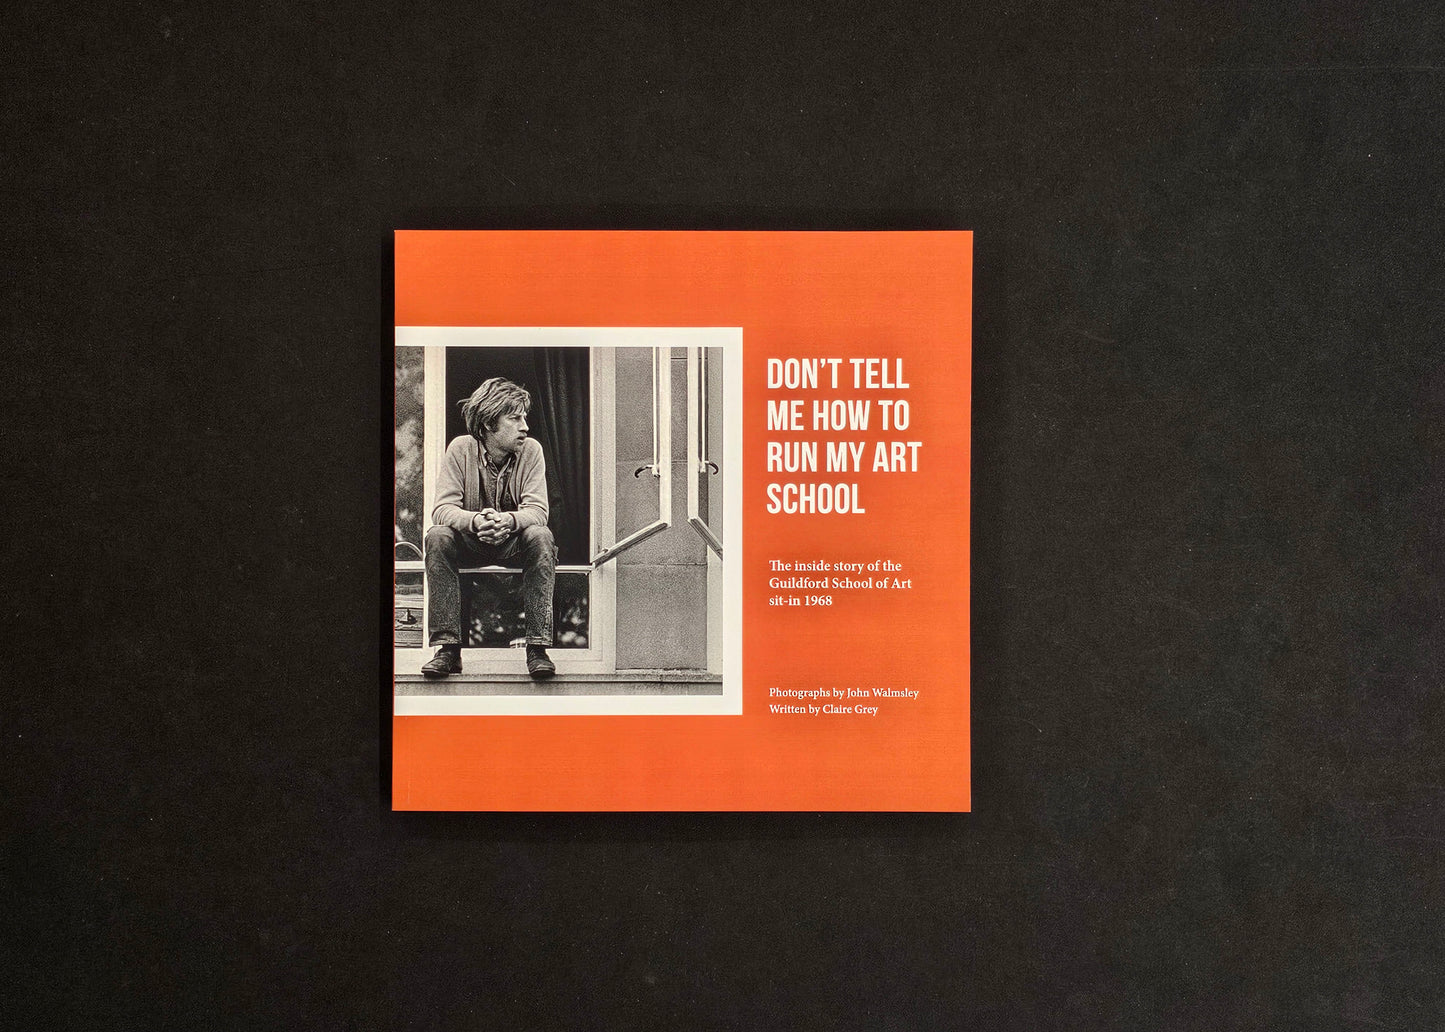 Don't tell me how to run my art school by John Walmsley and Claire Grey: Book + Print 3